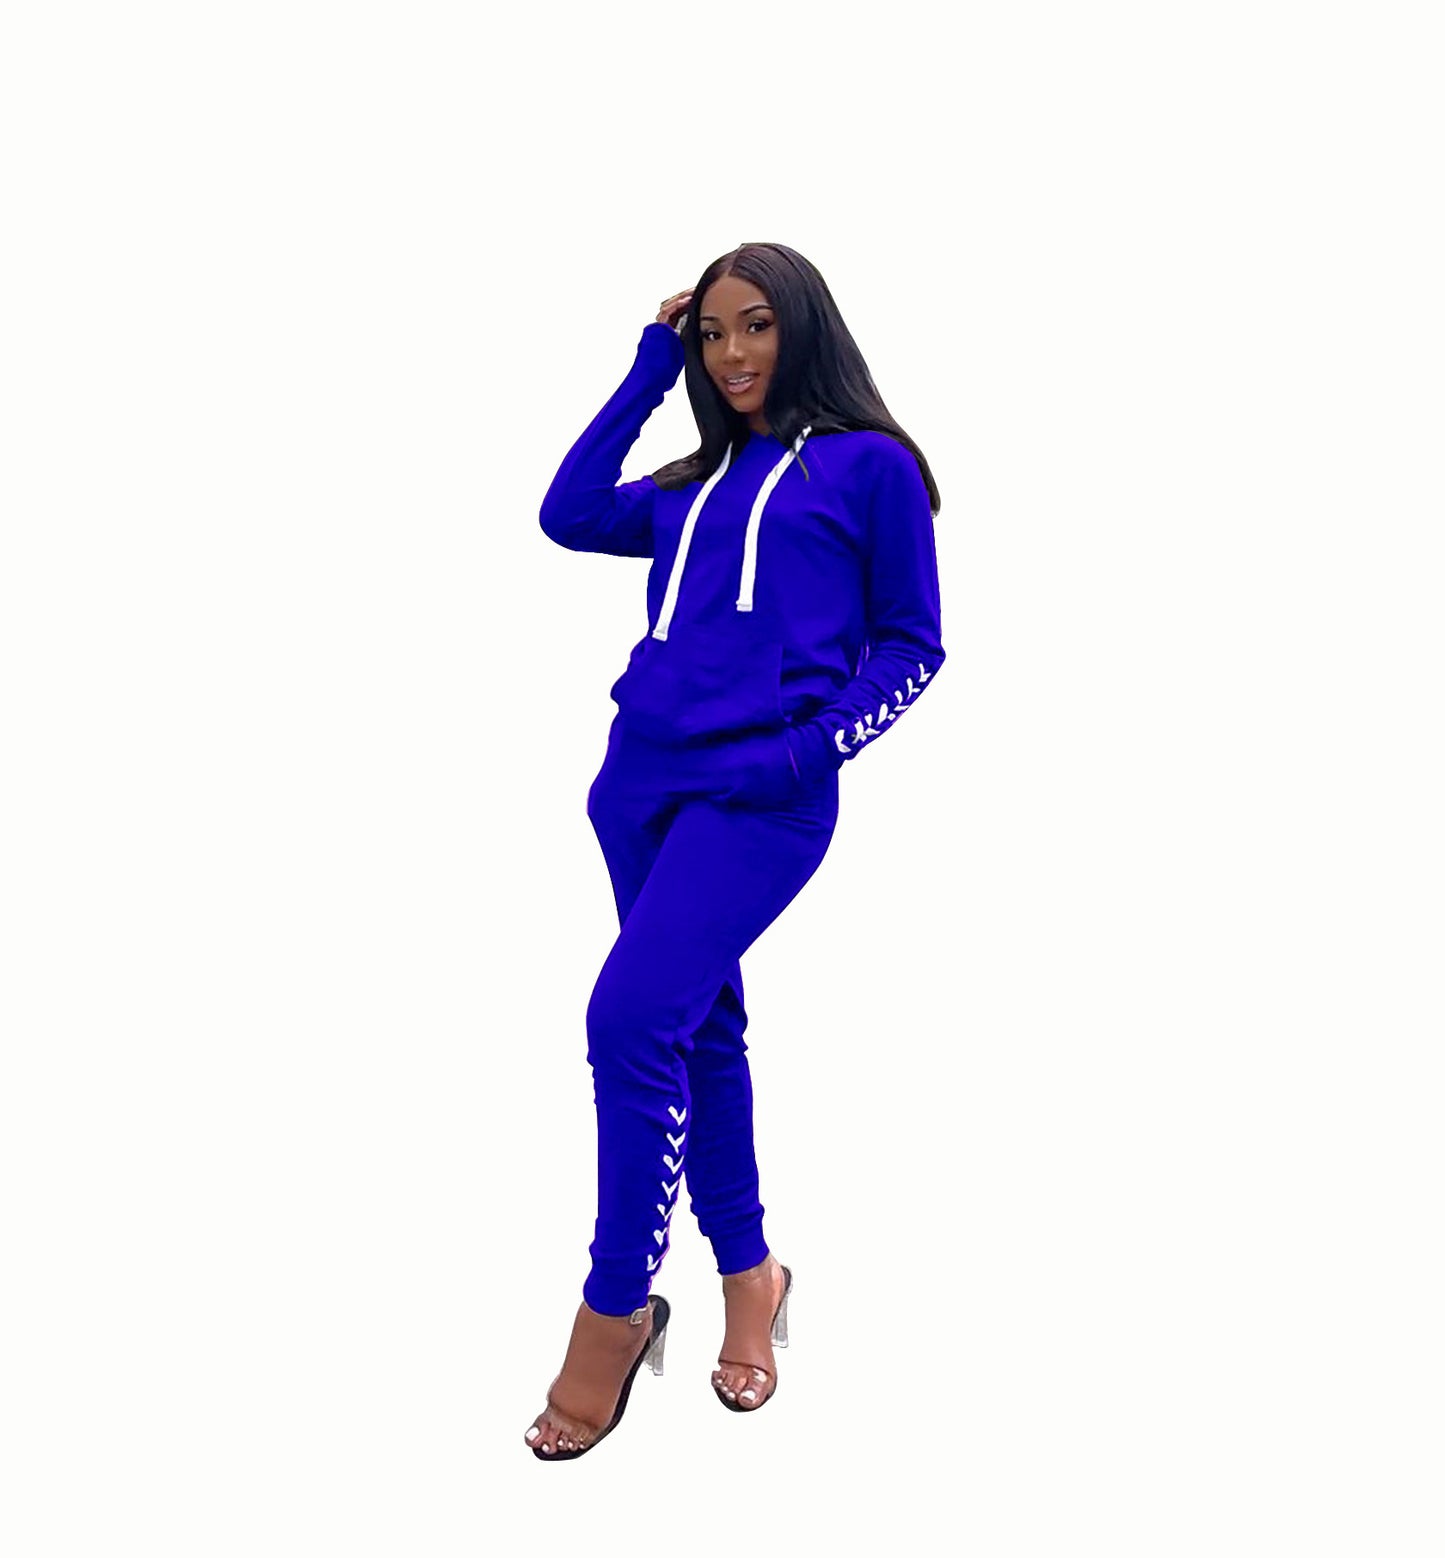 BamBam Women Lace-Up Hoodies and Pant Casual Sports Set - BamBam